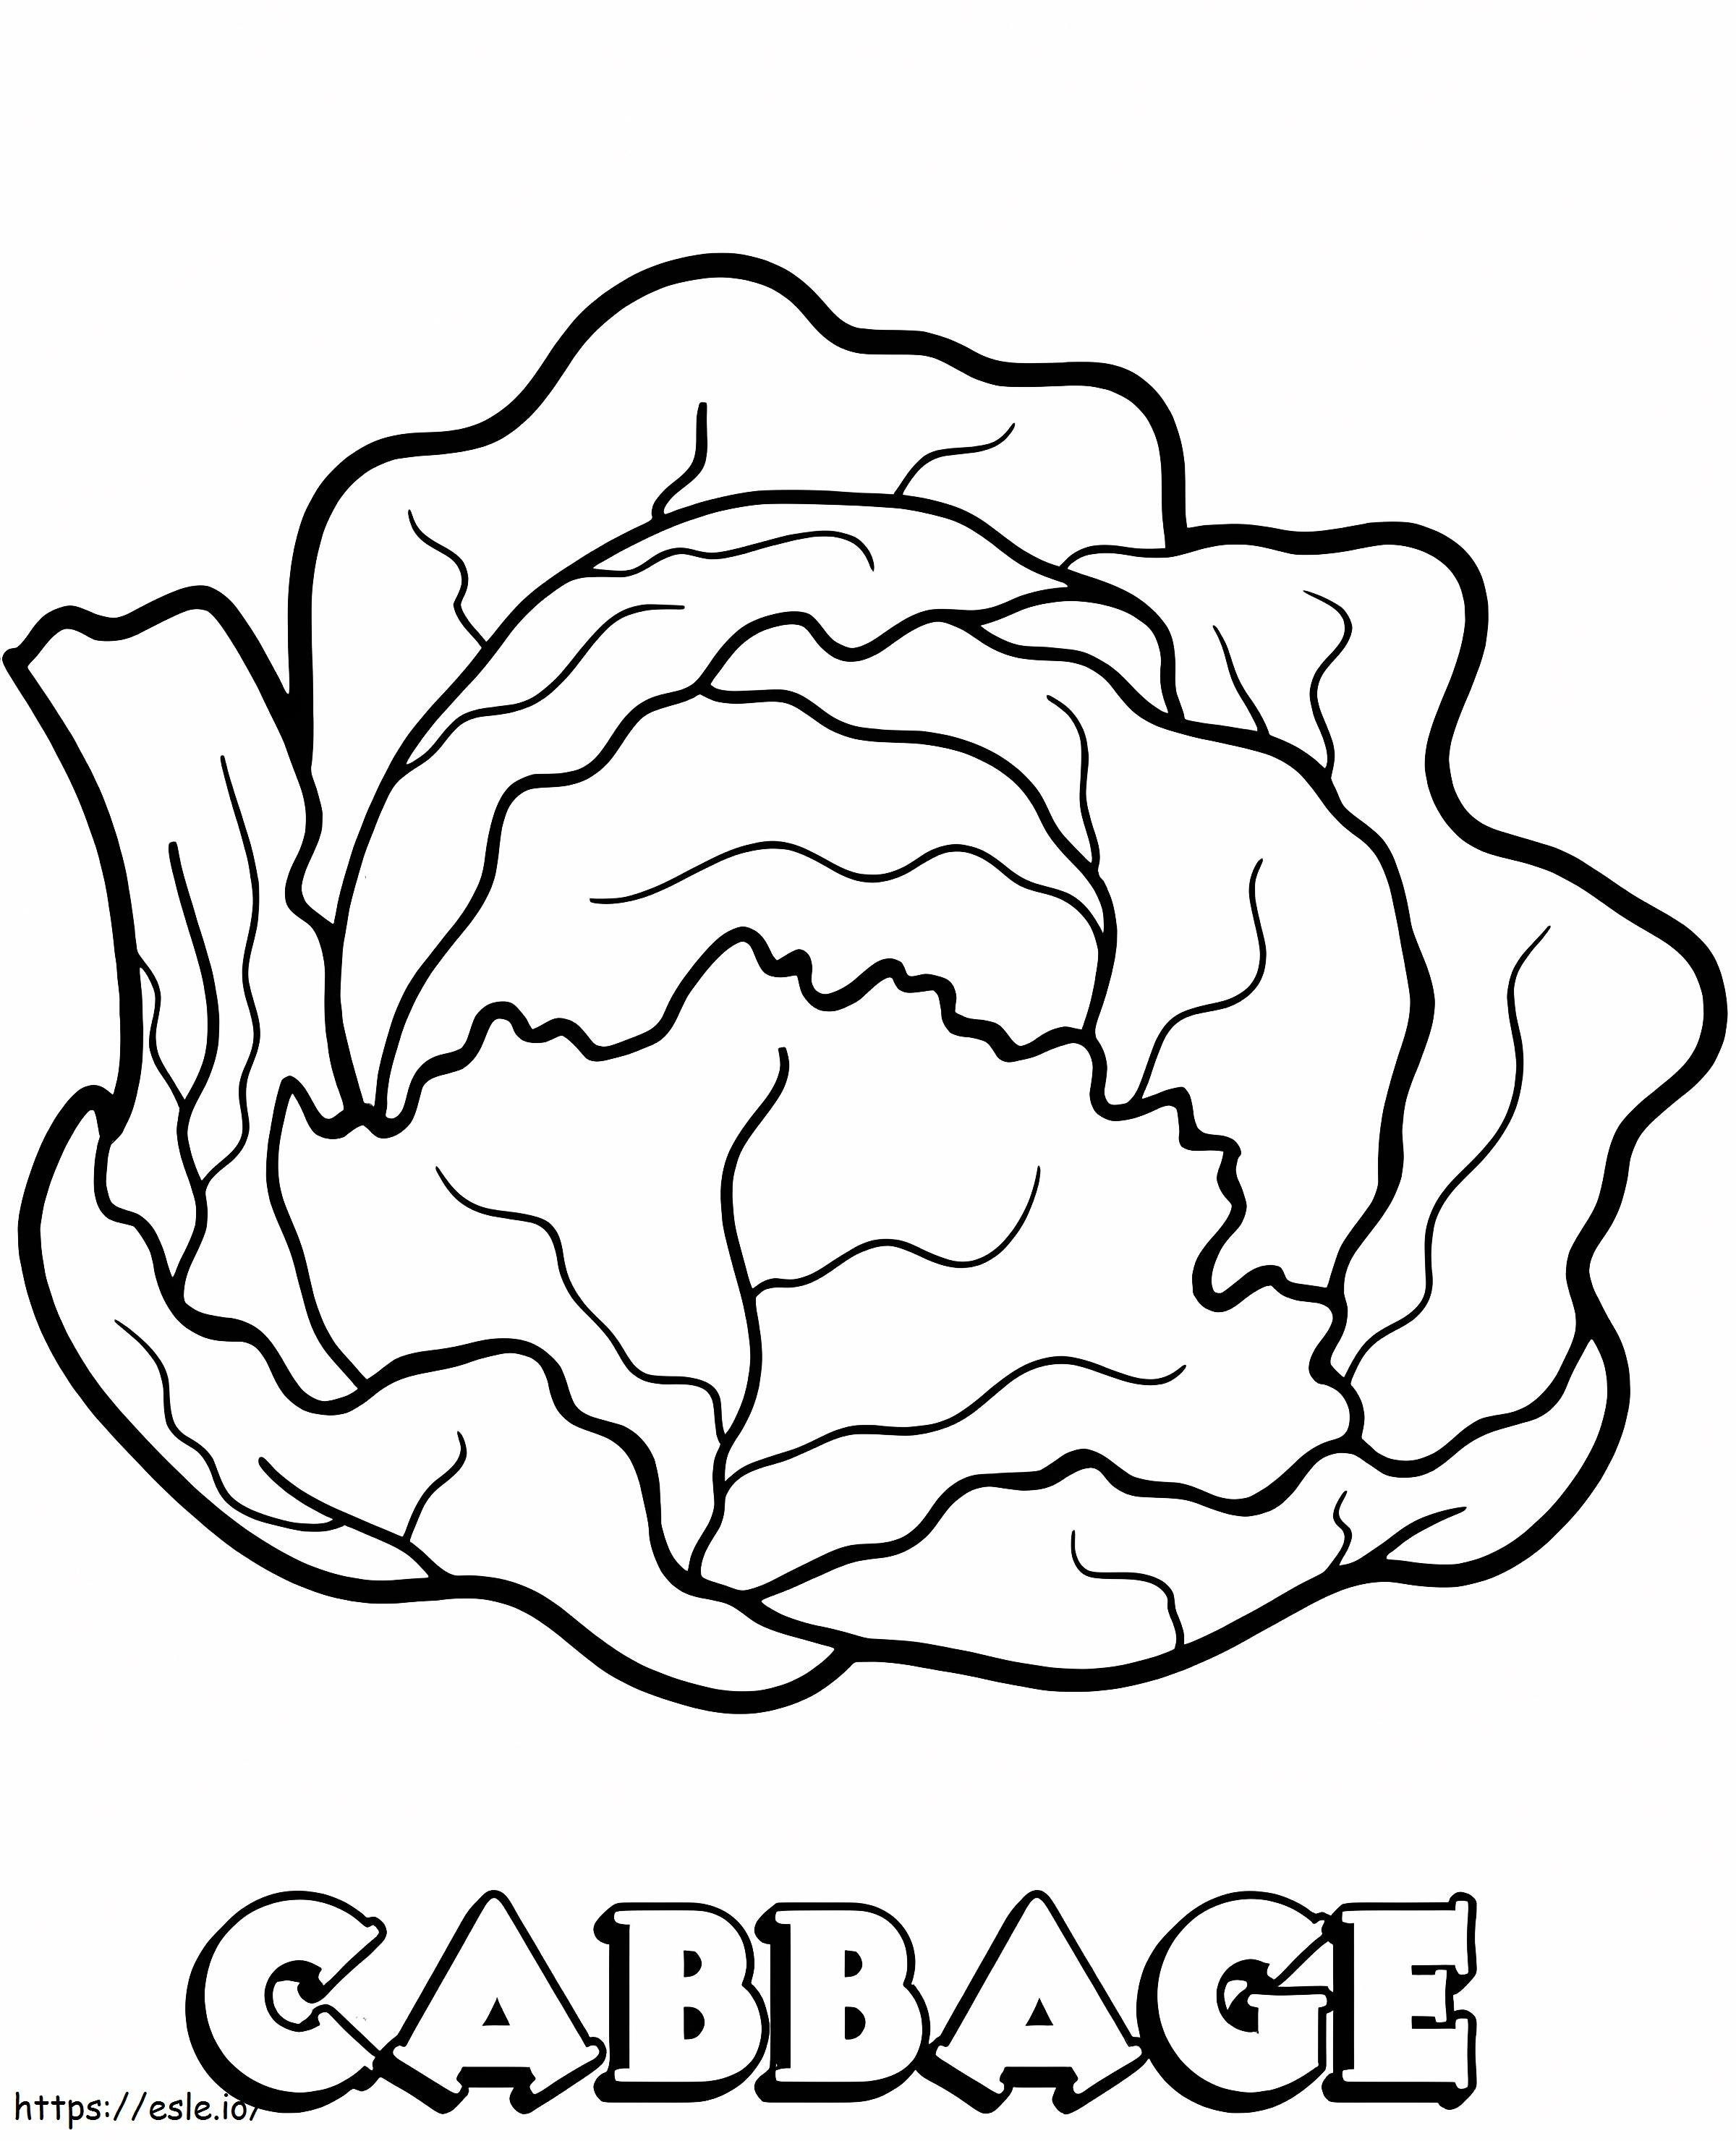 Green Cabbage 2 coloring page